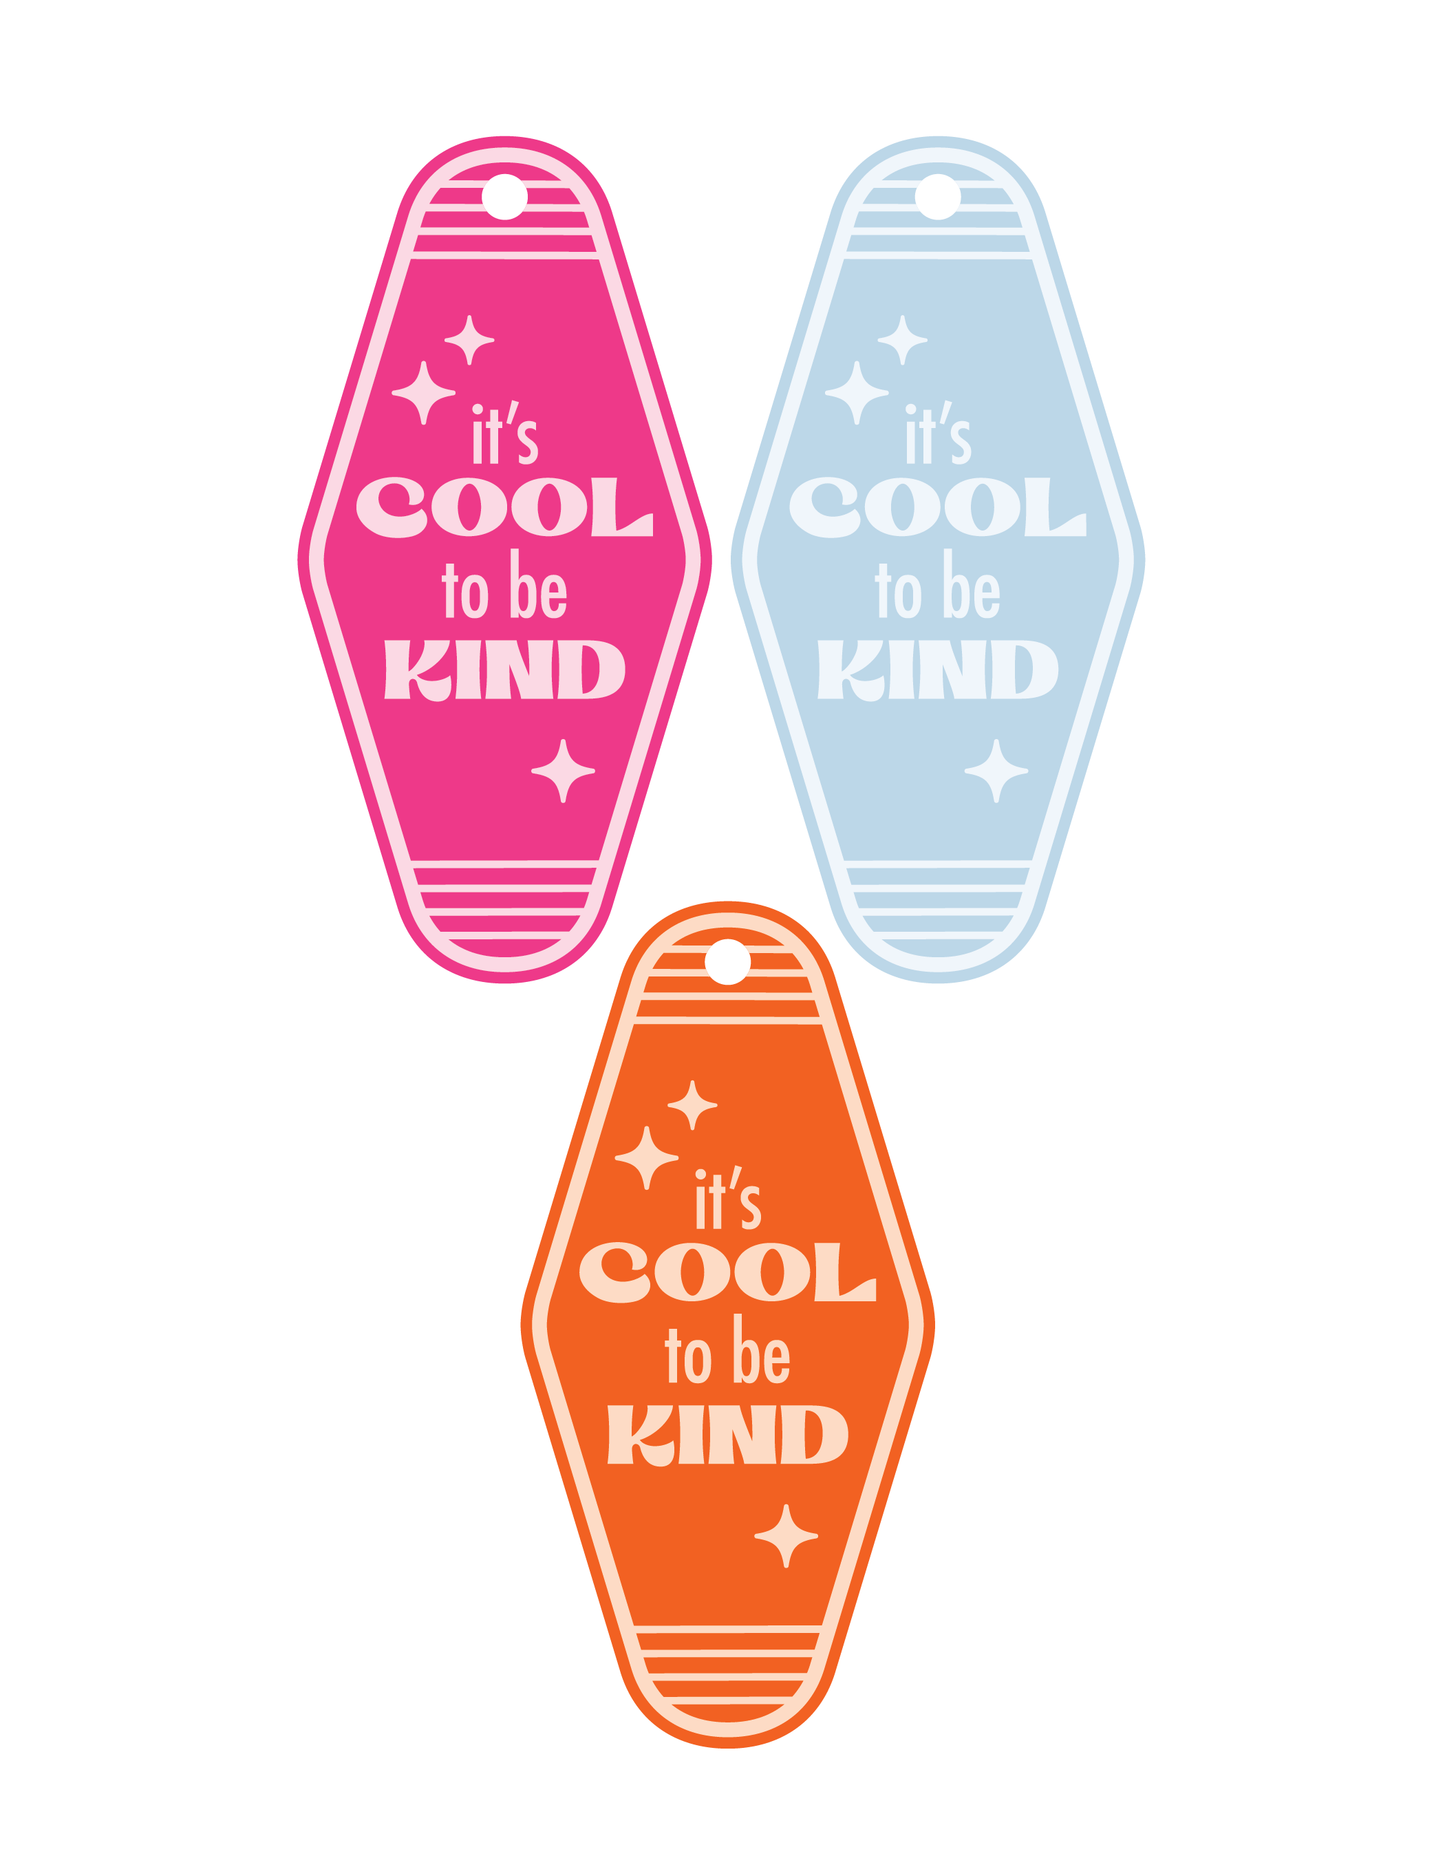 "It's Cool to be Kind" Keychain